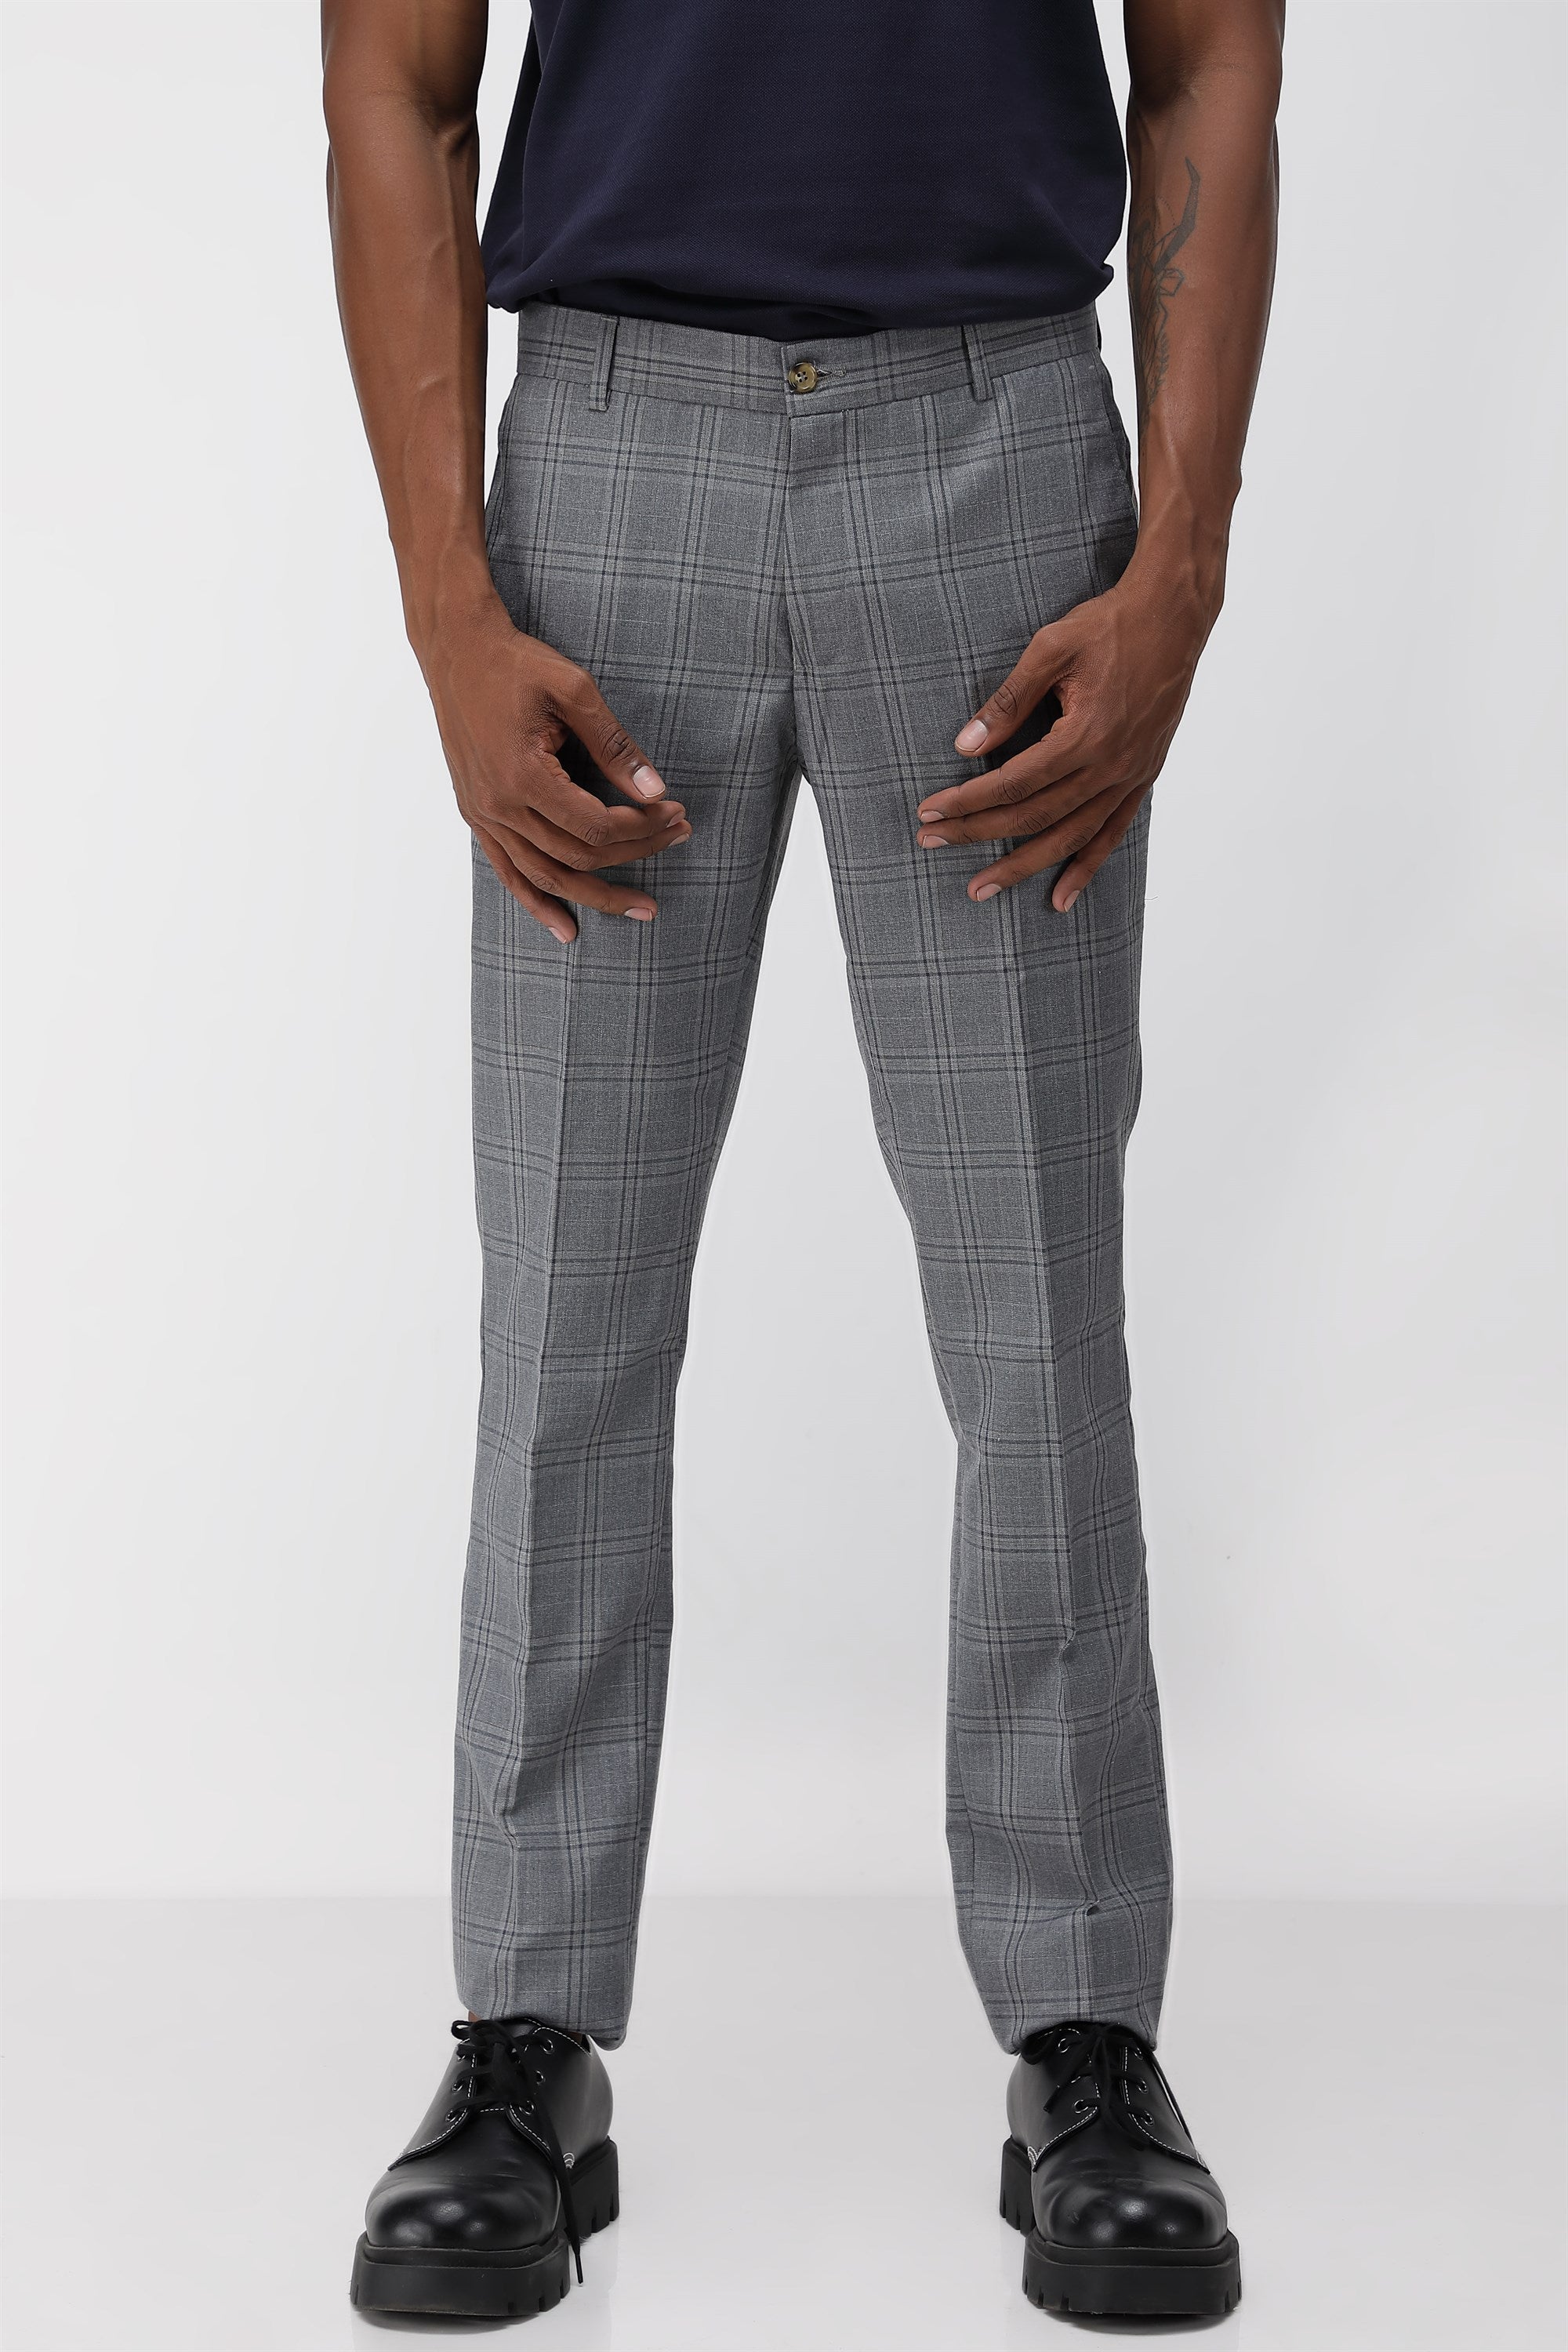 Buy Men Grey Slim Fit Check Flat Front Formal Trousers Online - 773234 |  Louis Philippe